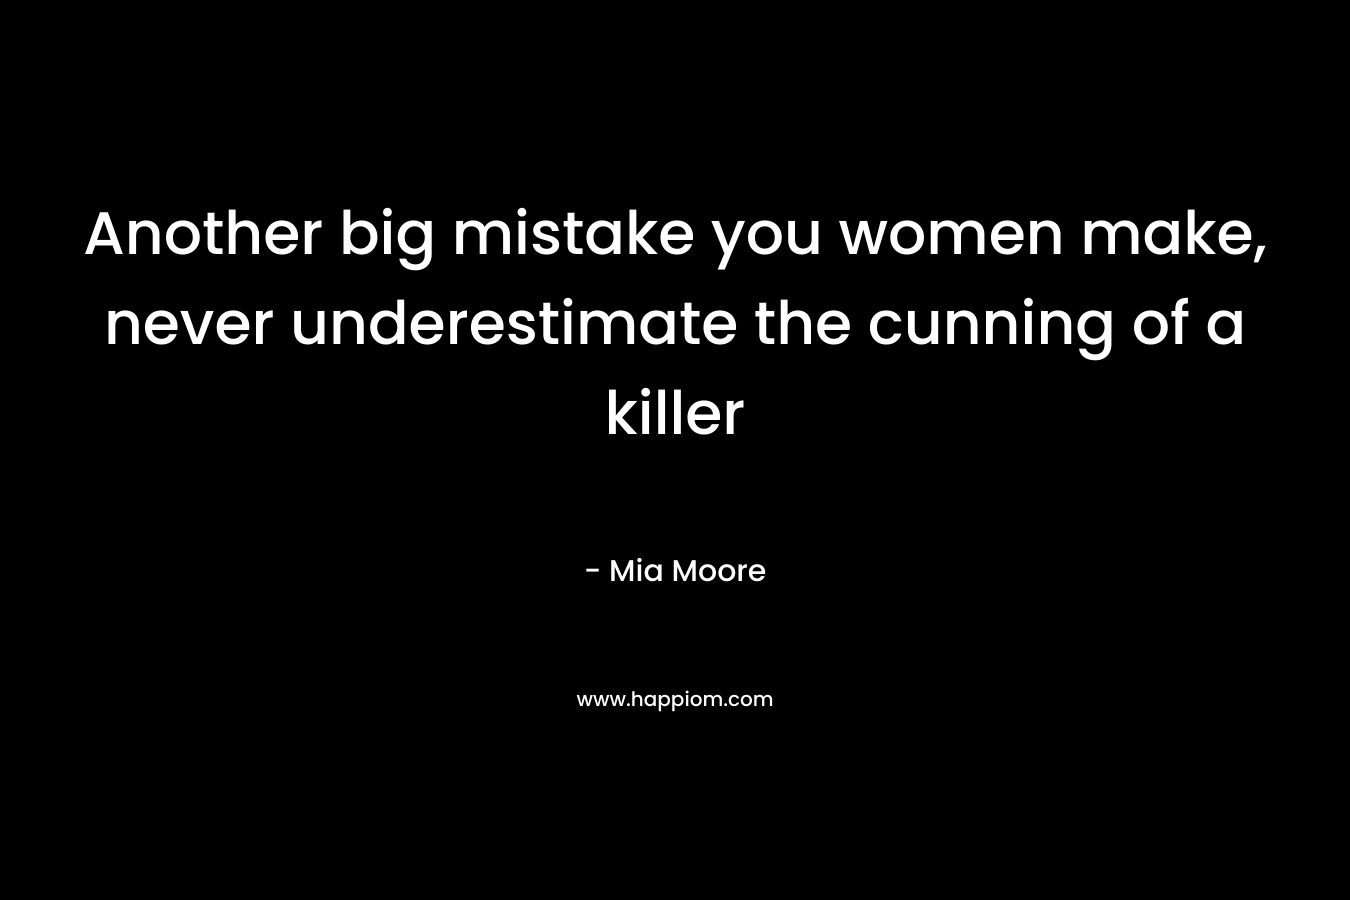 Another big mistake you women make, never underestimate the cunning of a killer – Mia Moore